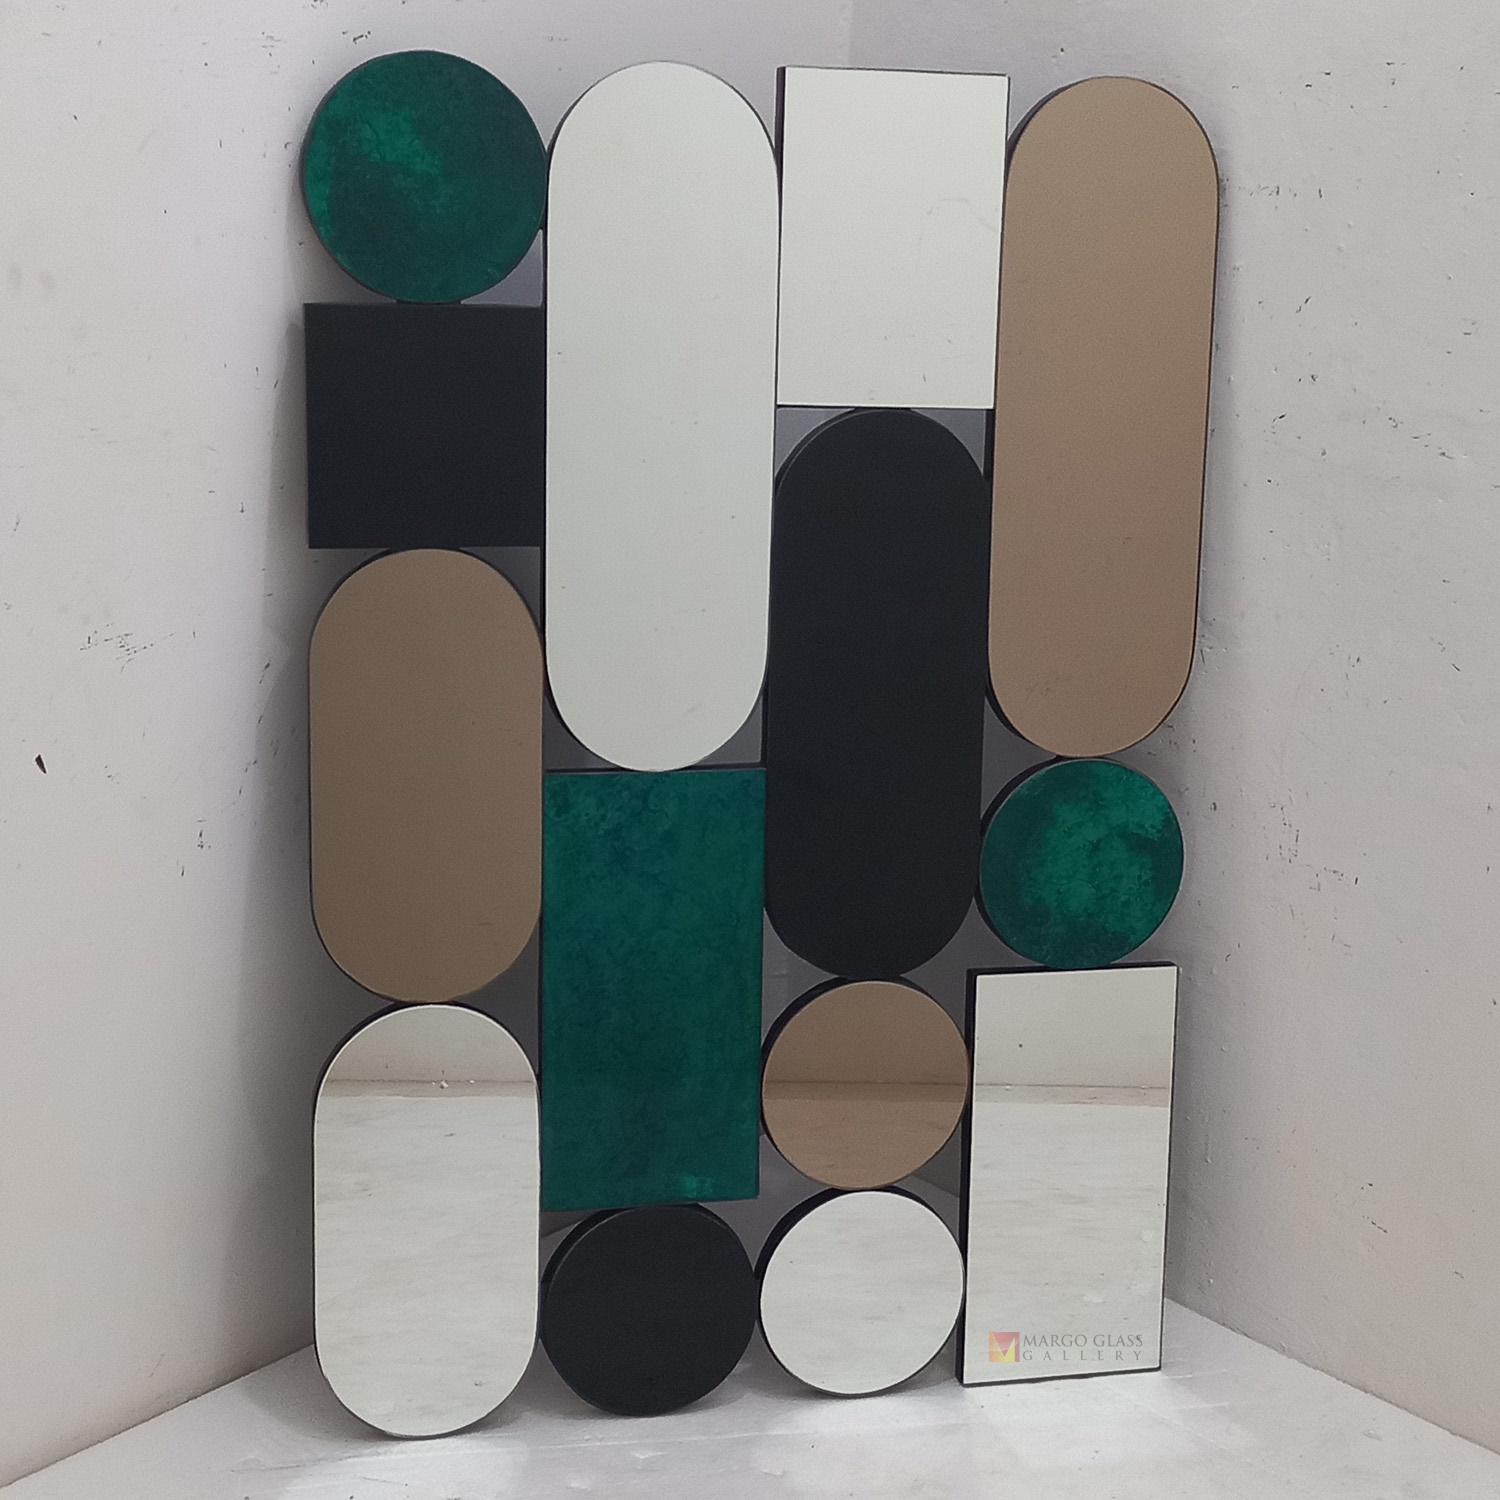 You Can Count on This Colorful Wall Mirror, Like a Real Count